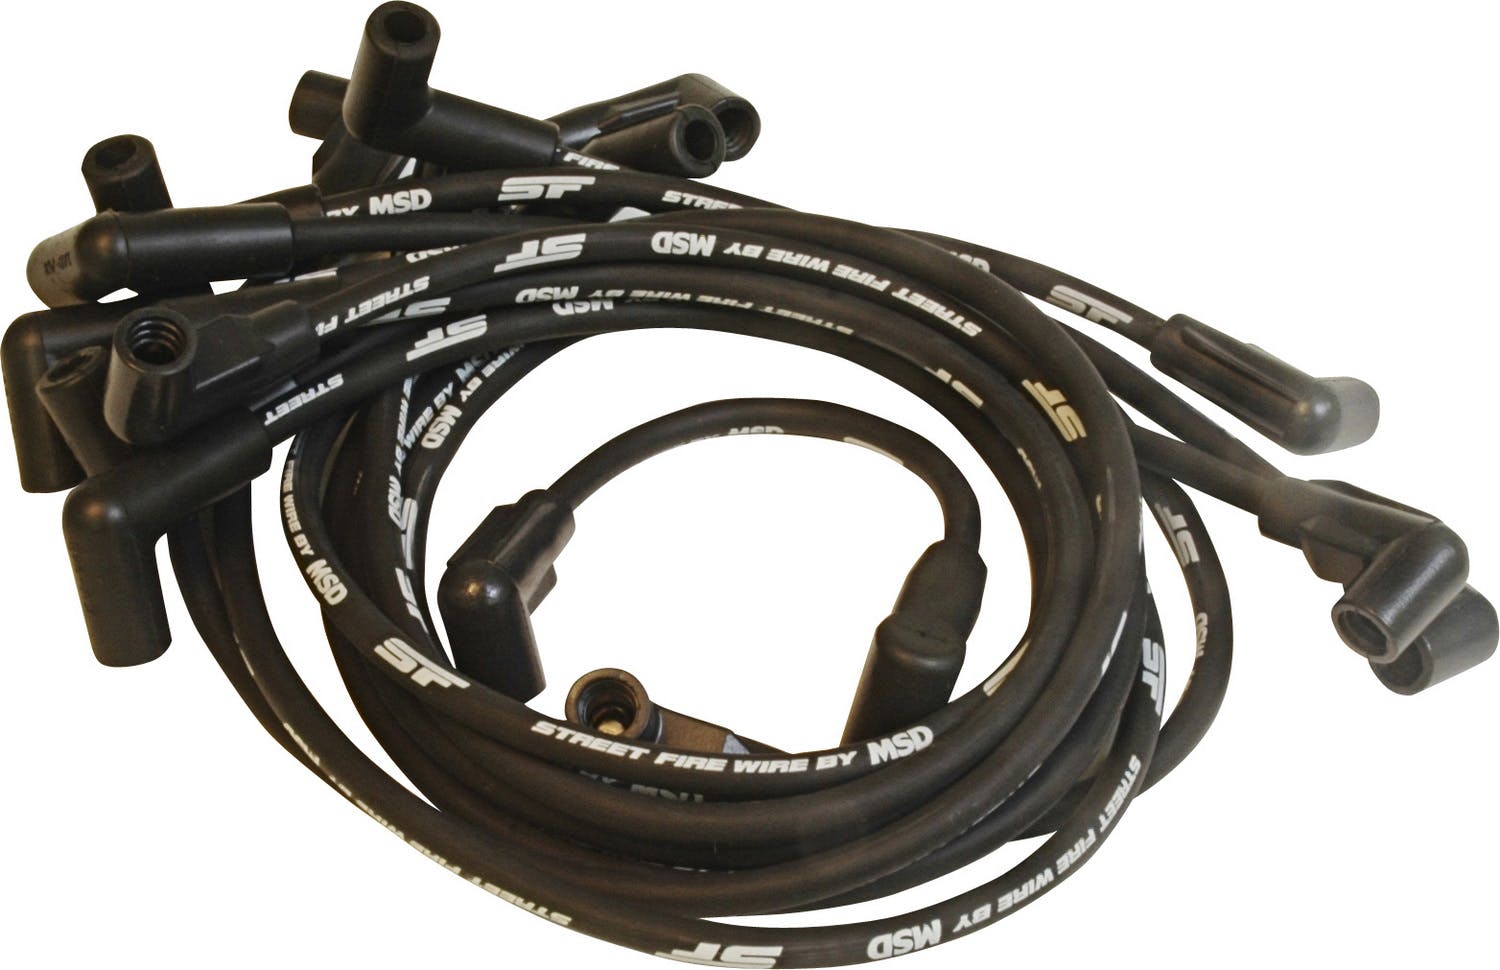 MSD Performance 5570 Wire Set, SF, Chevy Caprice/Camaro 88-On